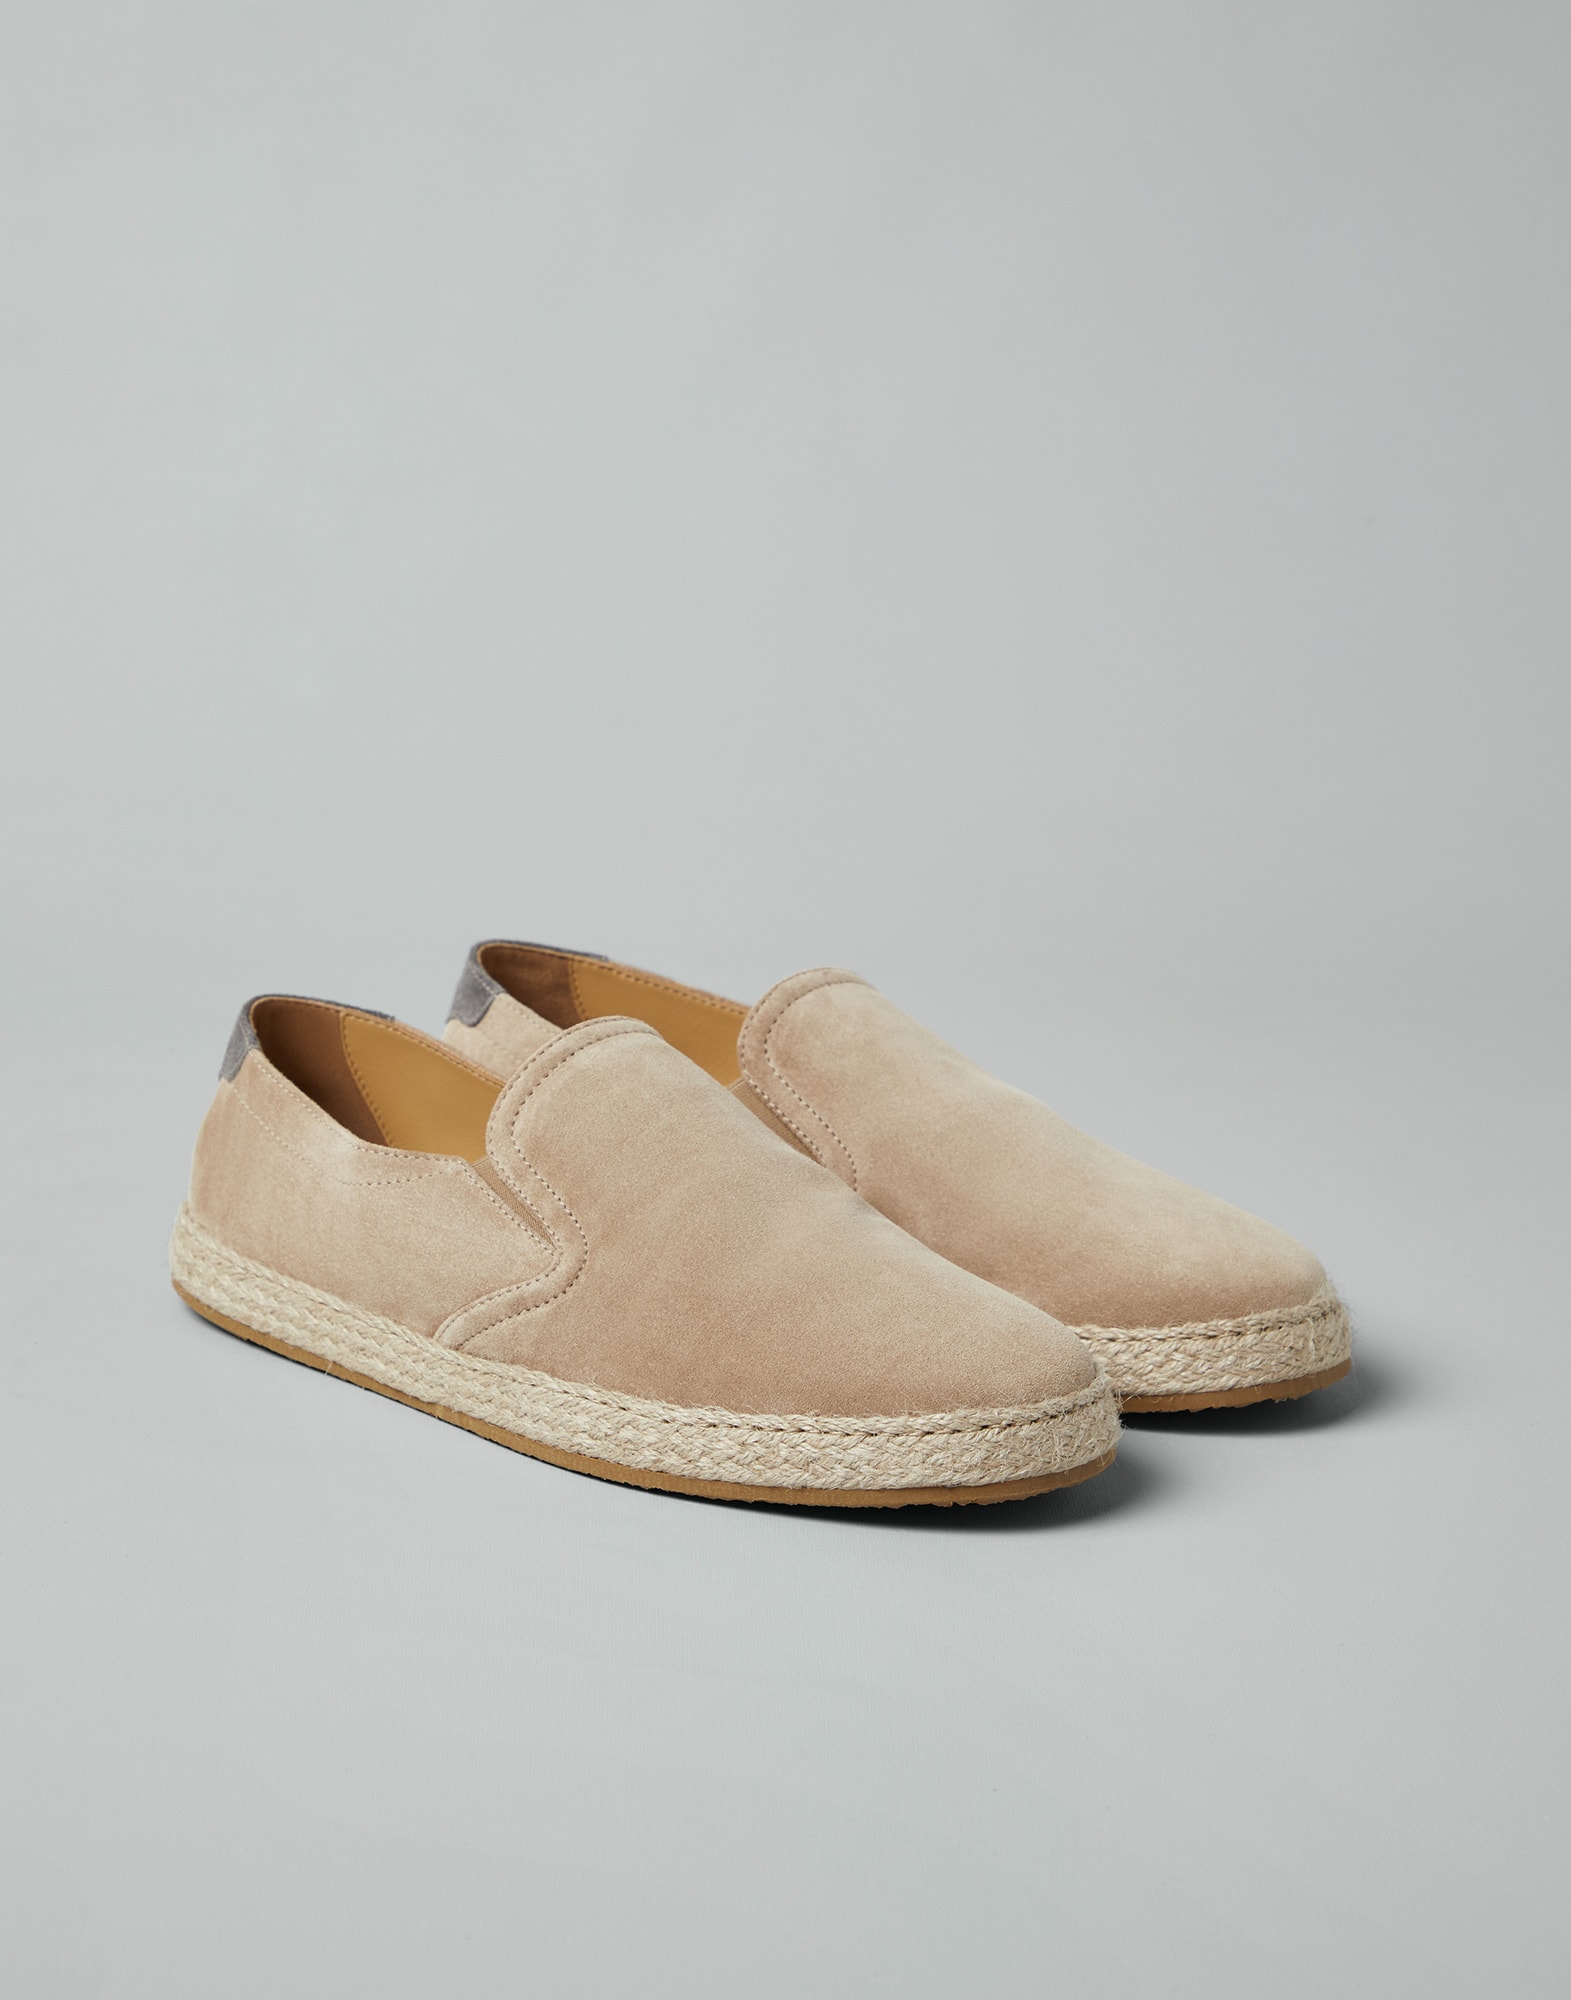 Loafers - Front view